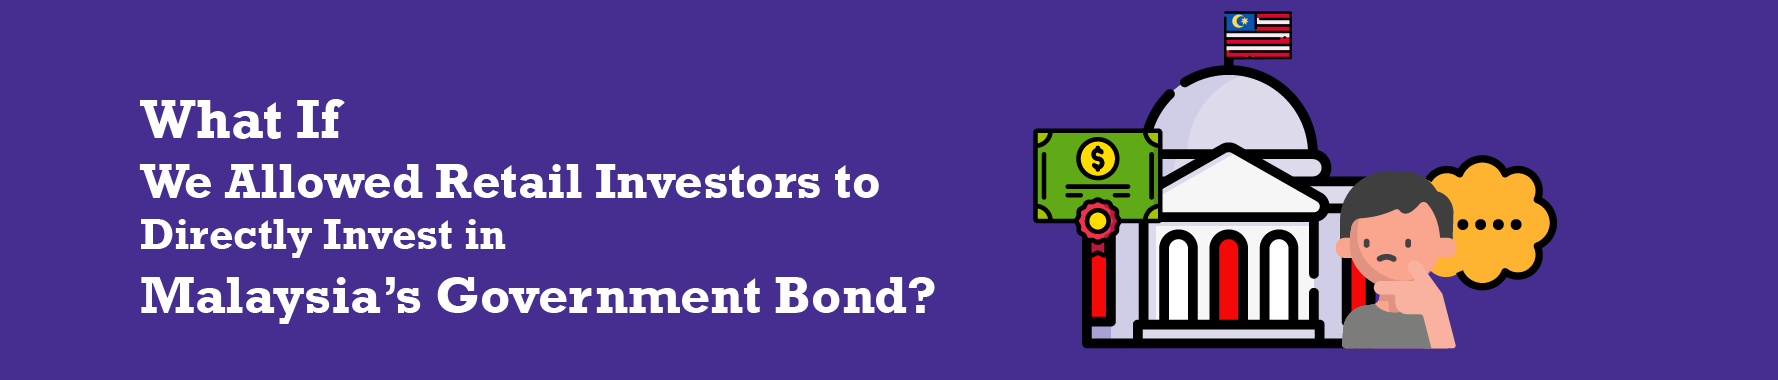 What If We Allowed Retail Investors to Directly Invest in Malaysia’s Government Bond?